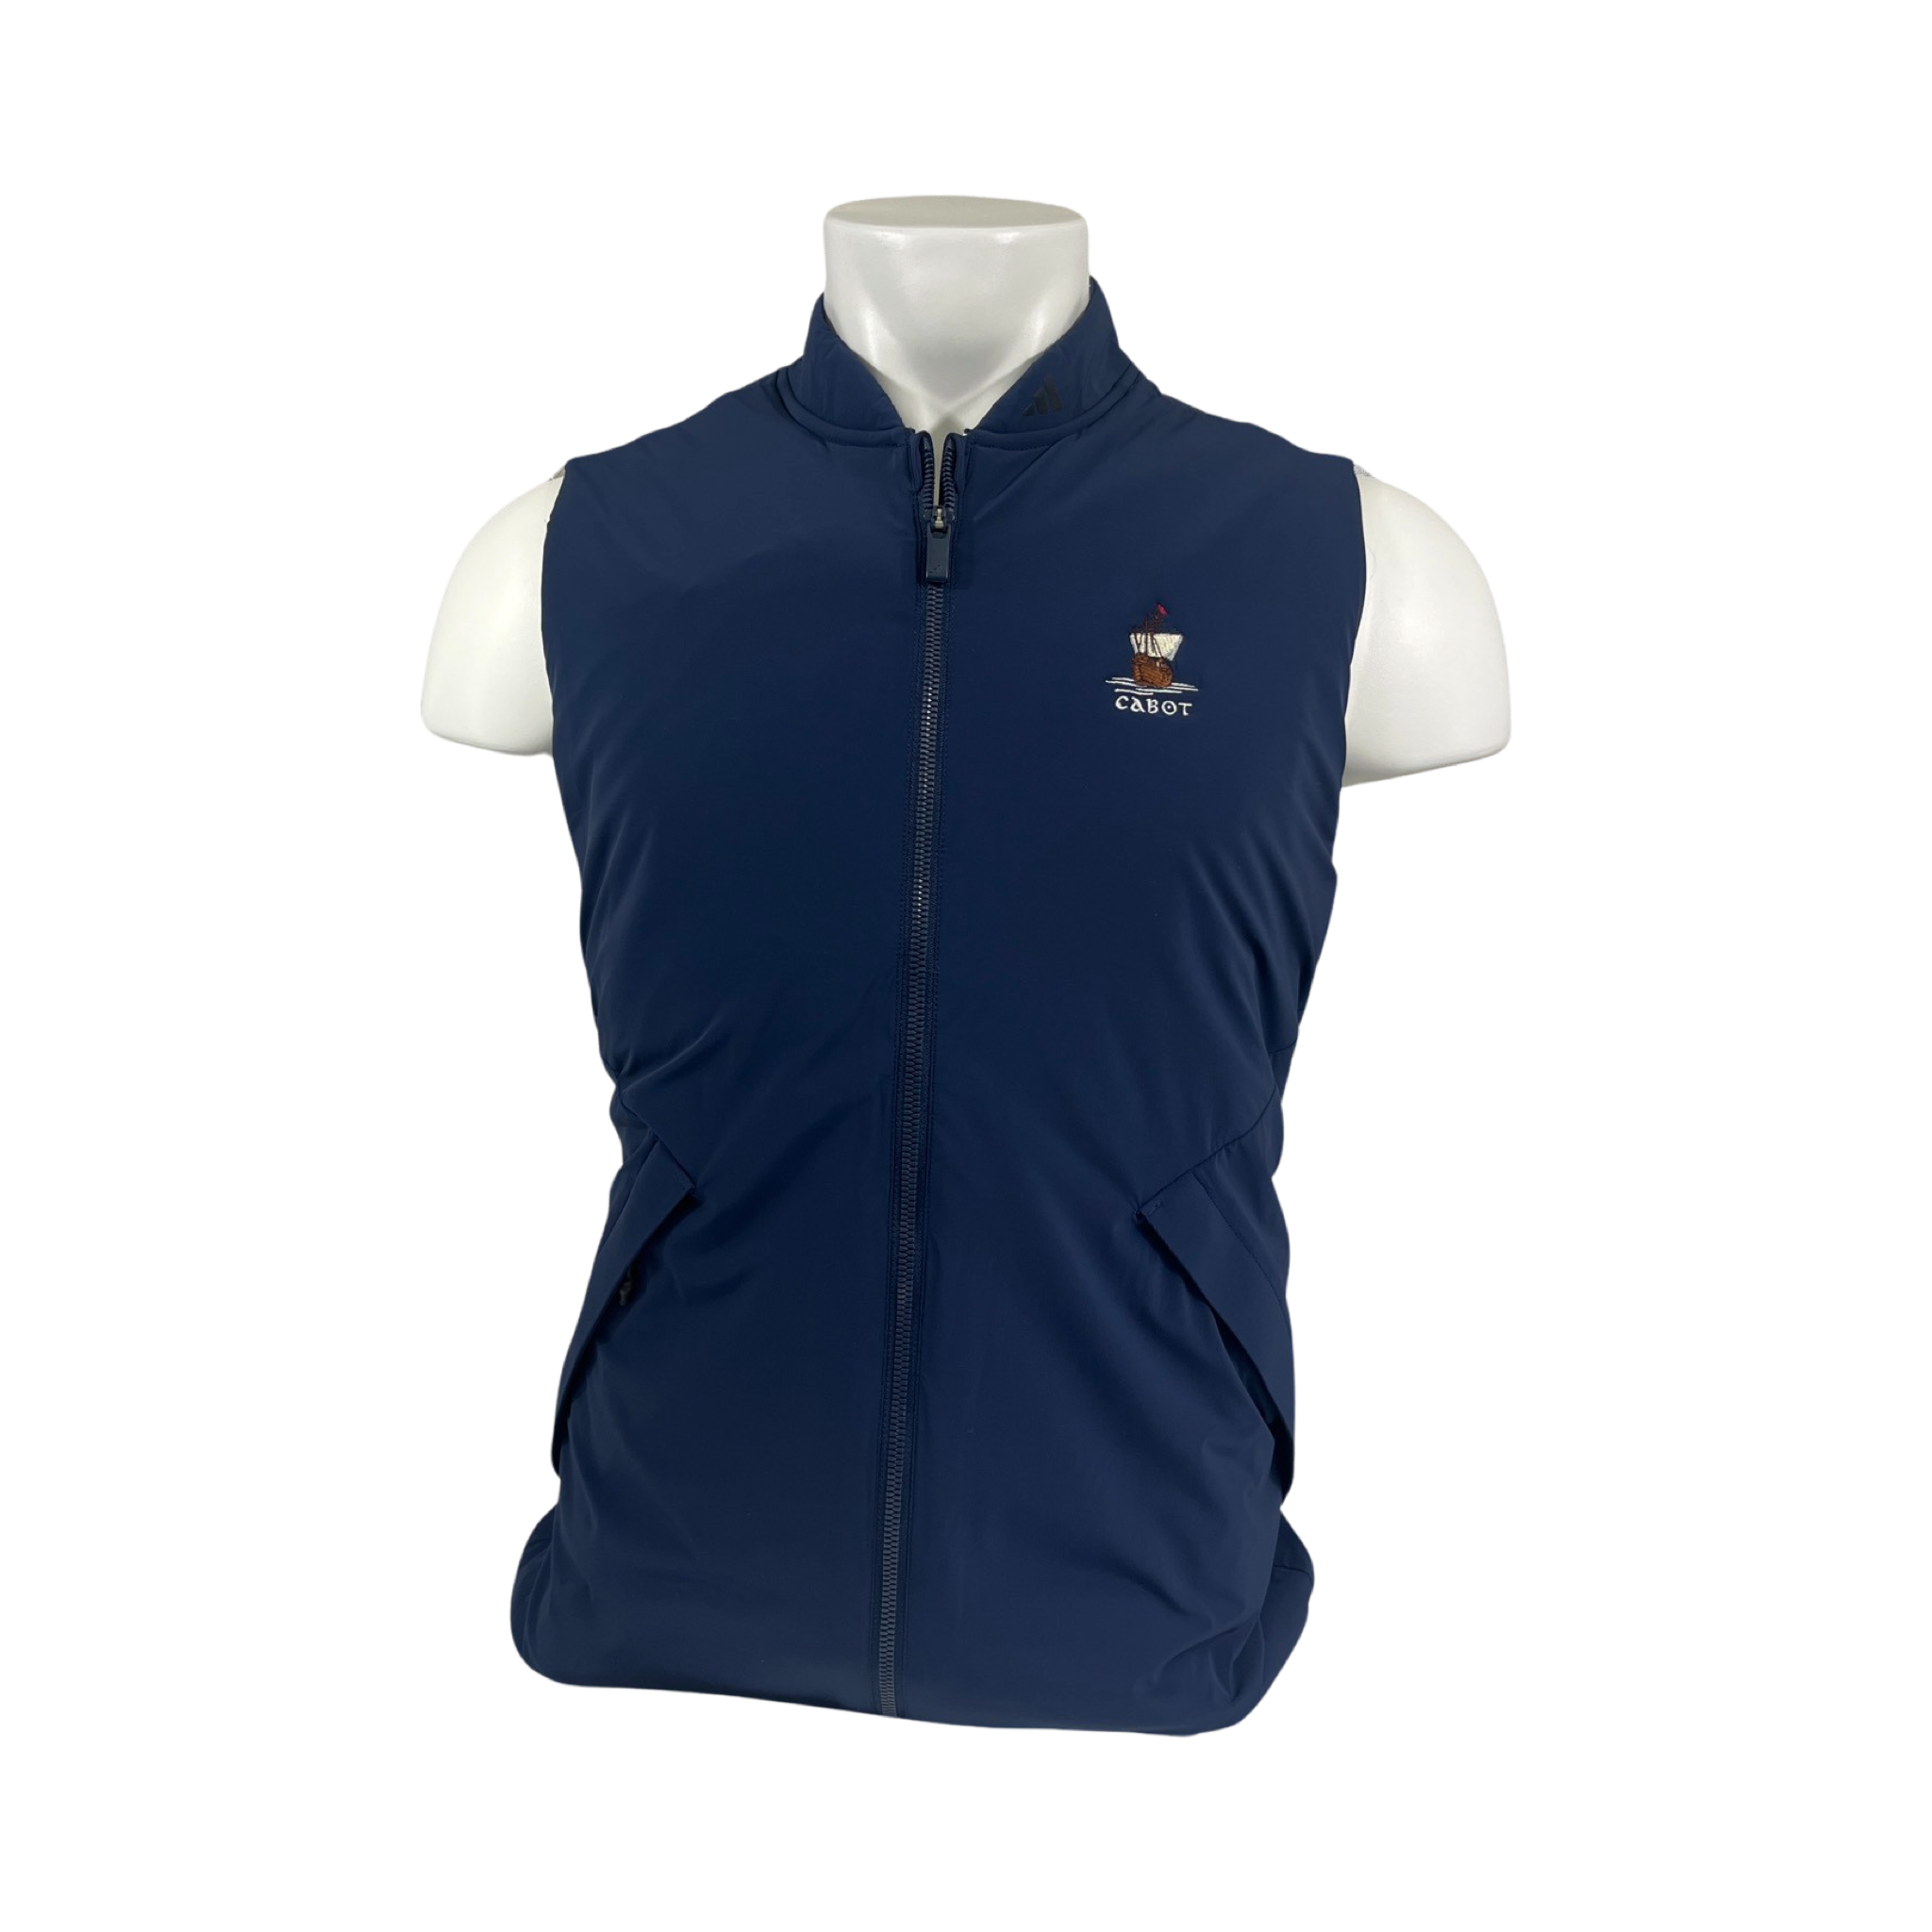 Adidas Cabot Links Ultimate 365 Tour Padded Vest